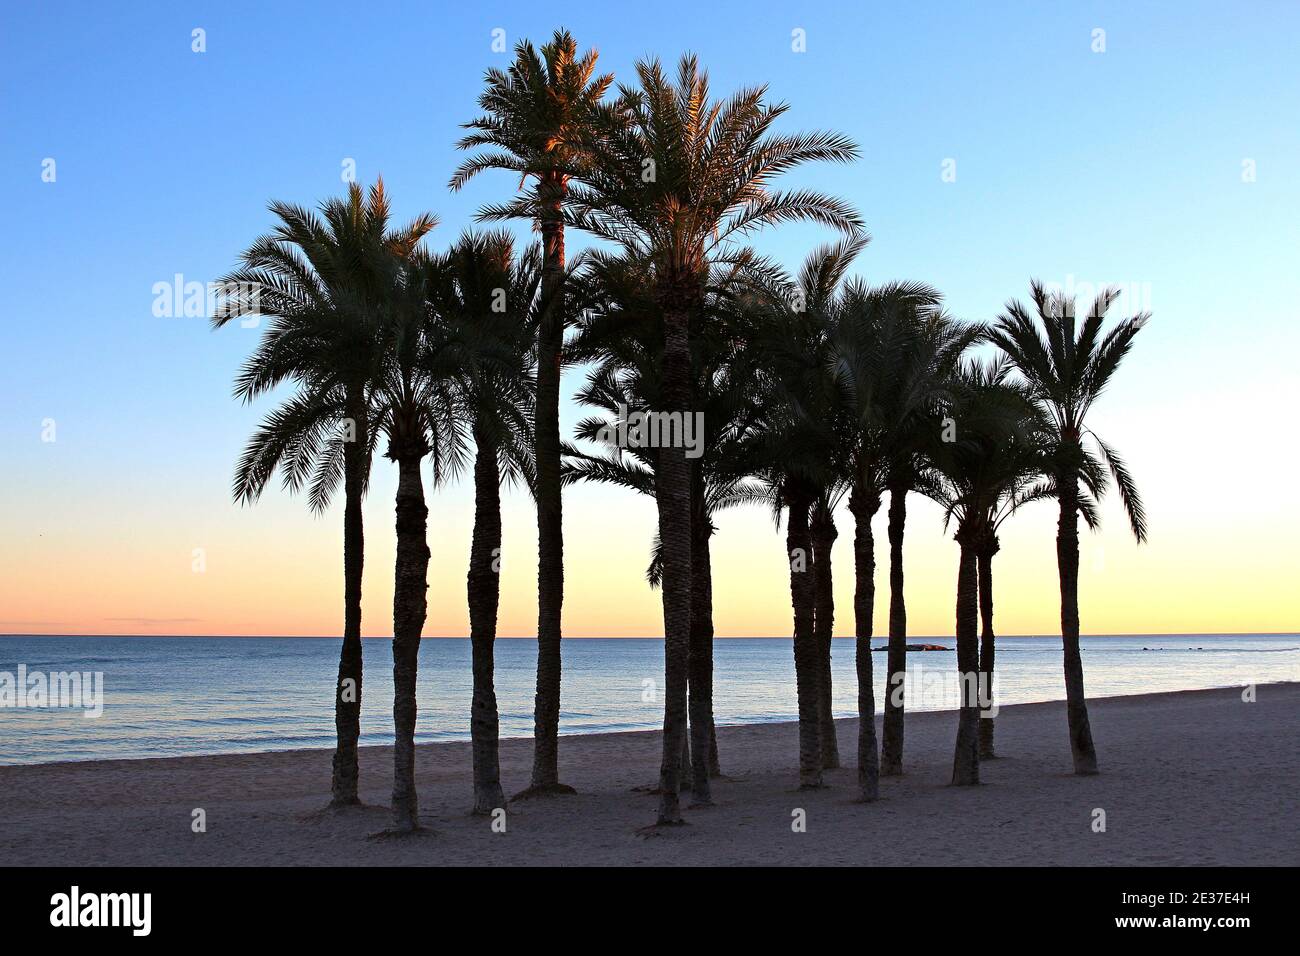 A stand of palm trees in near silhouette make for a simplistic scene on Villajoyosa's beach, Spain. It is the end of November and approaching sunset. Stock Photo